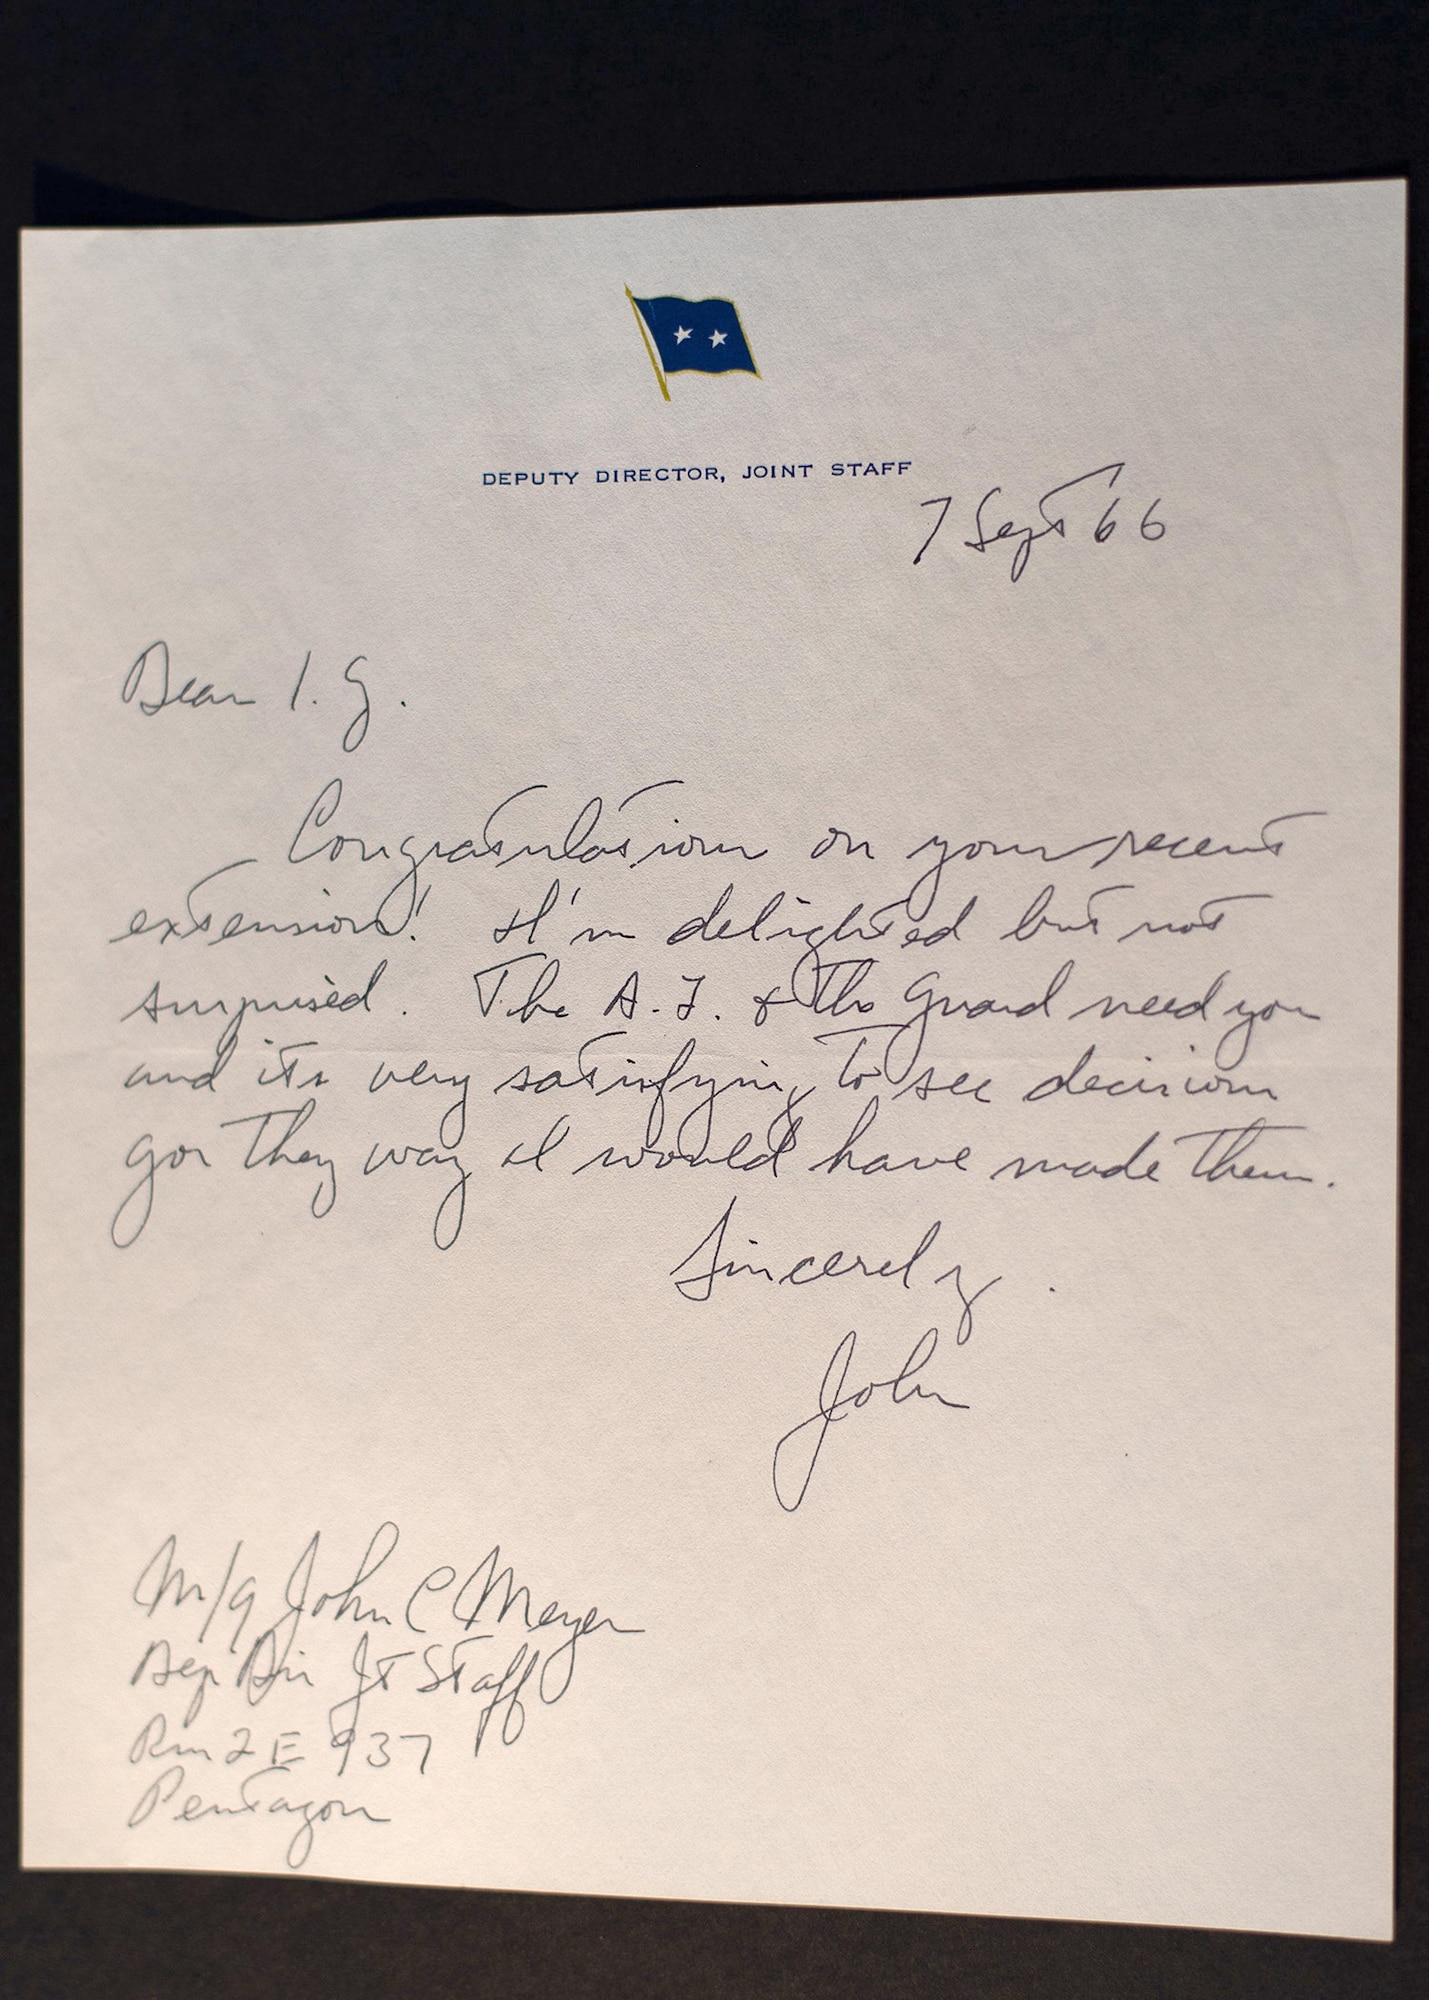 A letter from U.S. Air Force Maj. Gen. John C. Meyer, Word War II flying ace and Deputy Director of the Joint Chiefs of Staff at the time, to U.S. Air Force Maj. Gen. I.G. Brown, September 1966, congratulating him on his extension as the National Guard Bureau's Assistant Chief for Air. General Brown’s position later changed to make him the first Director of the Air National Guard. (U.S. Air National Guard photo/Master Sgt. Mike R. Smith)